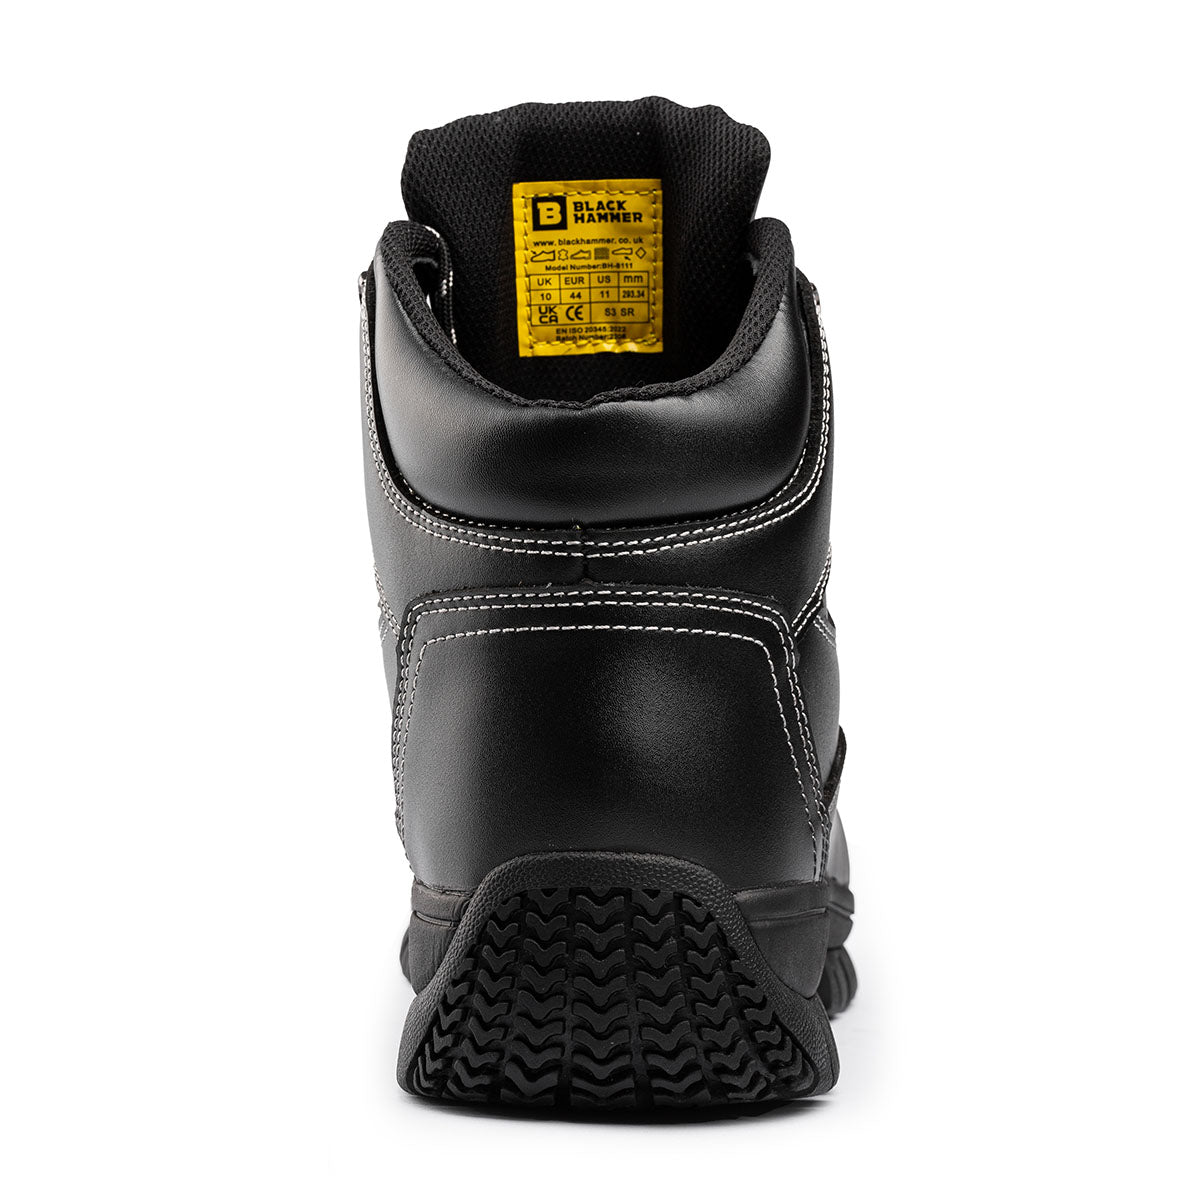 Extra grip safety boots